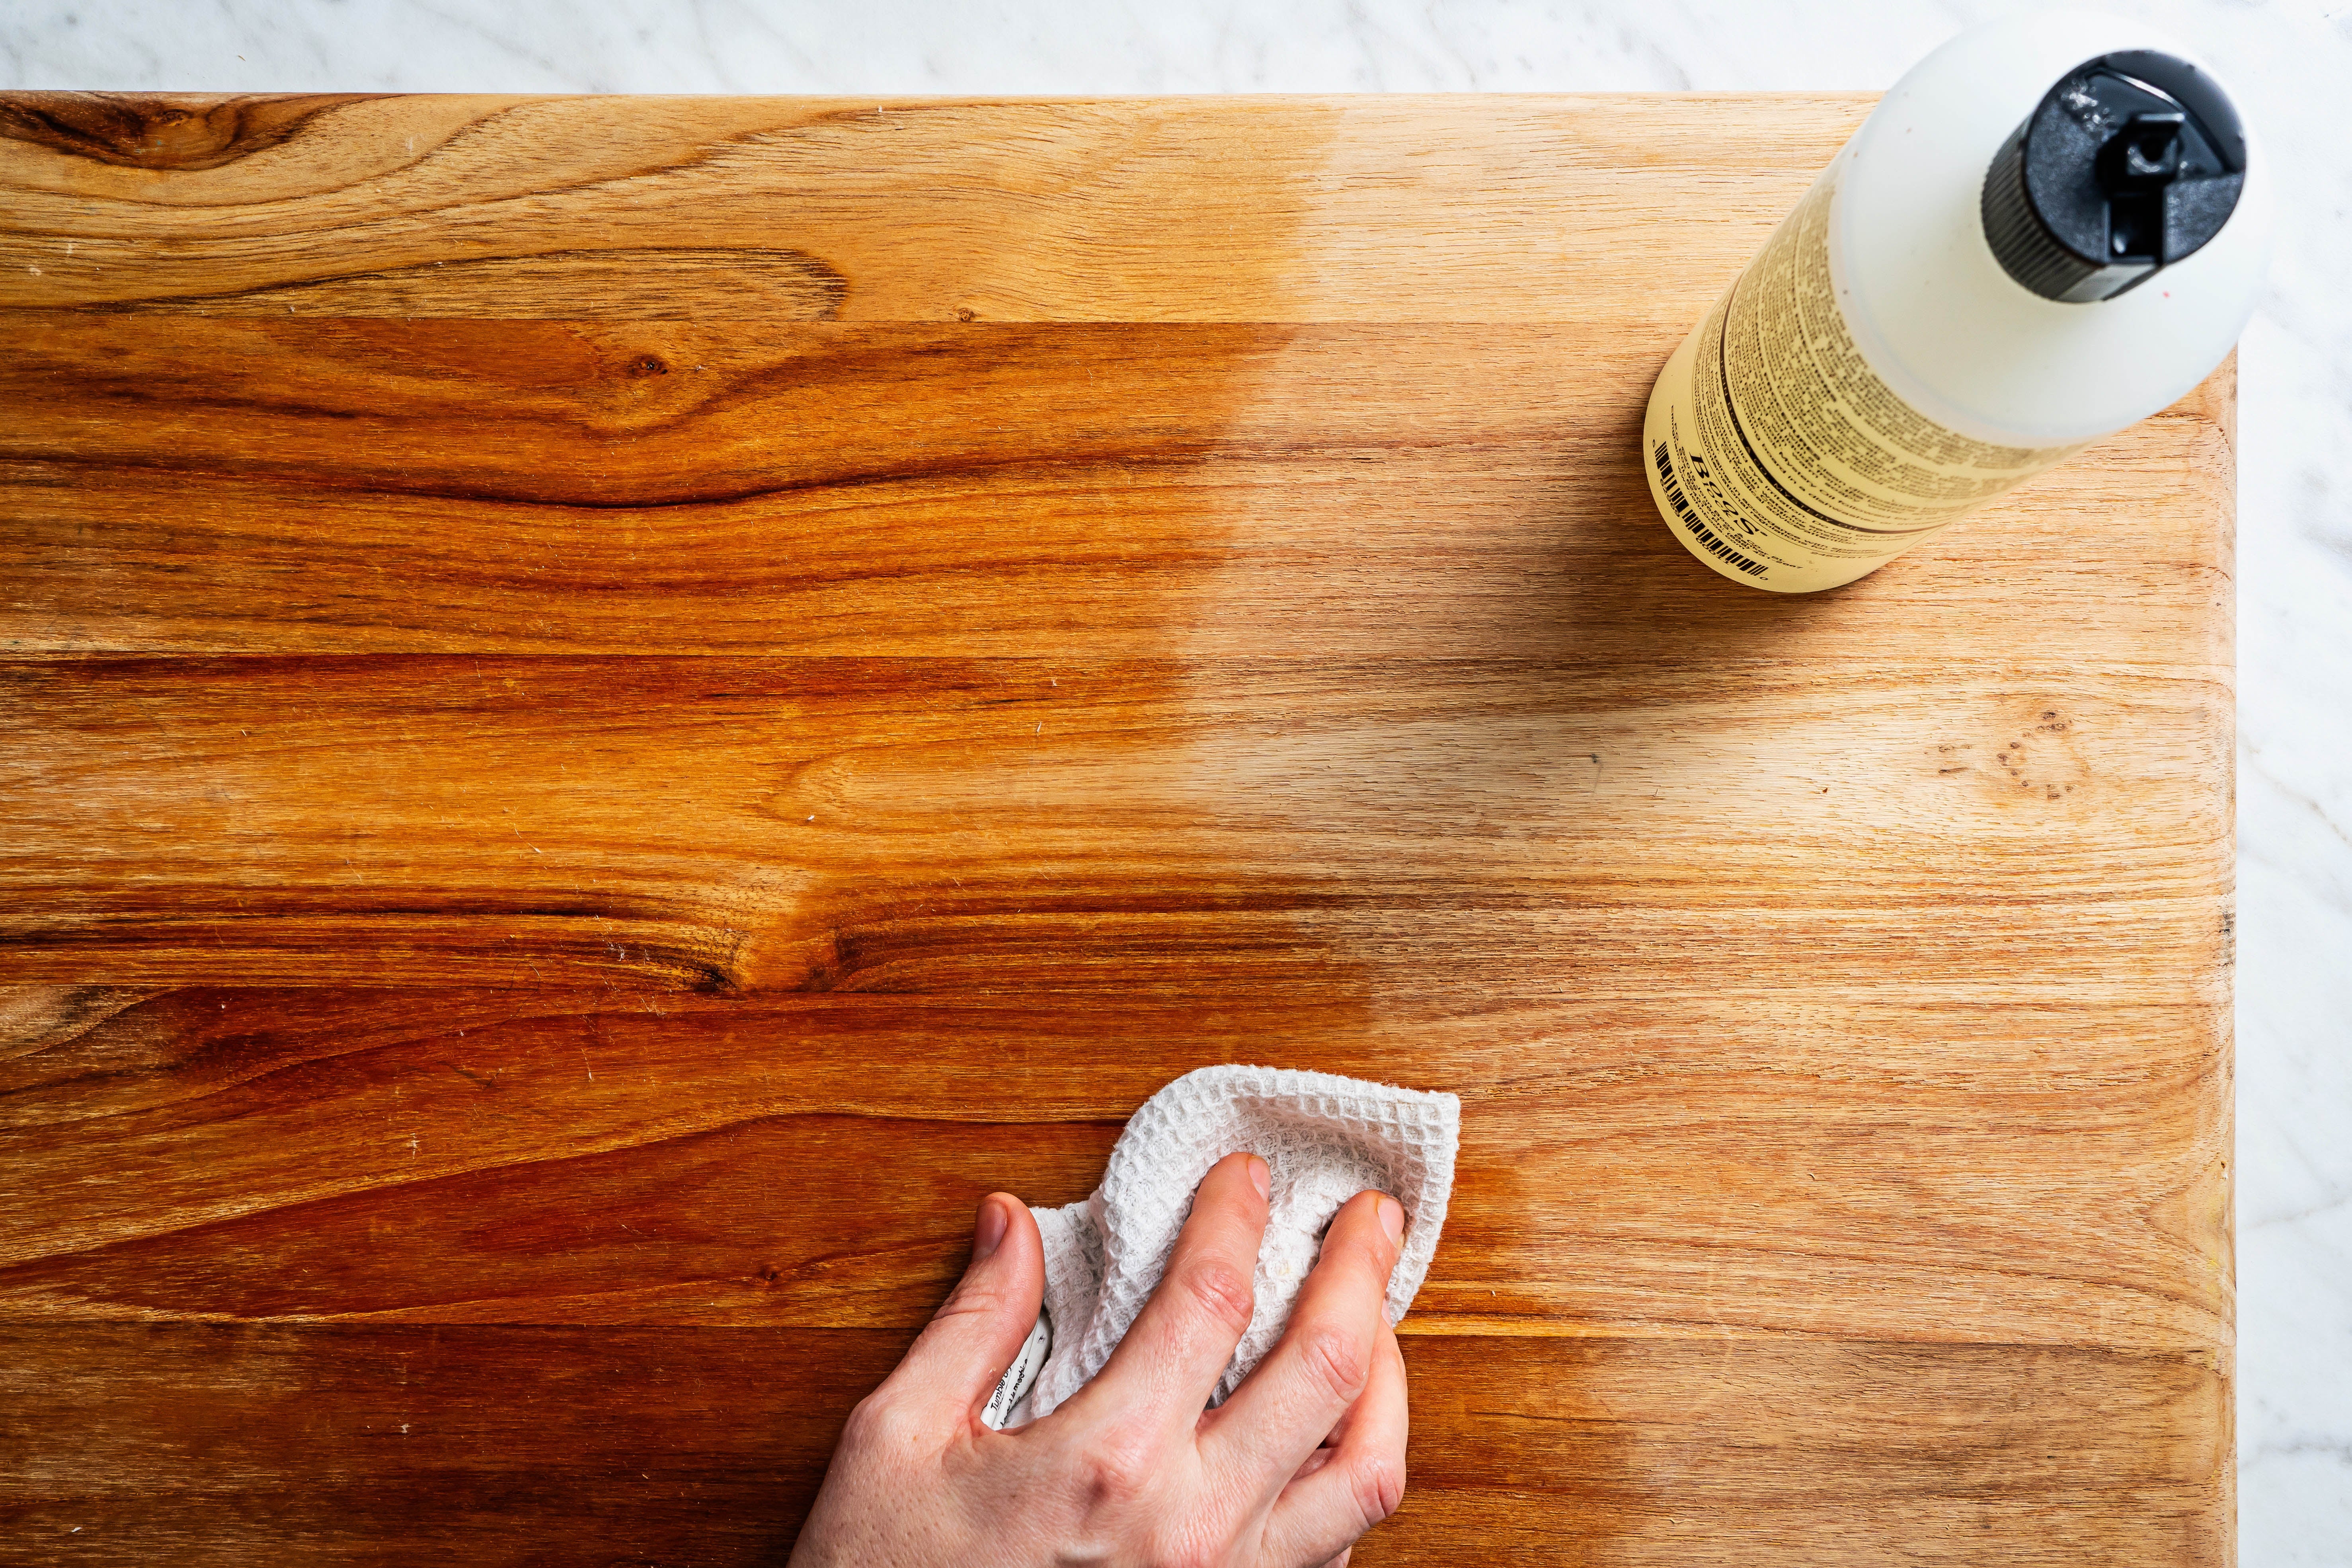 How to take care of your wooden chopping board